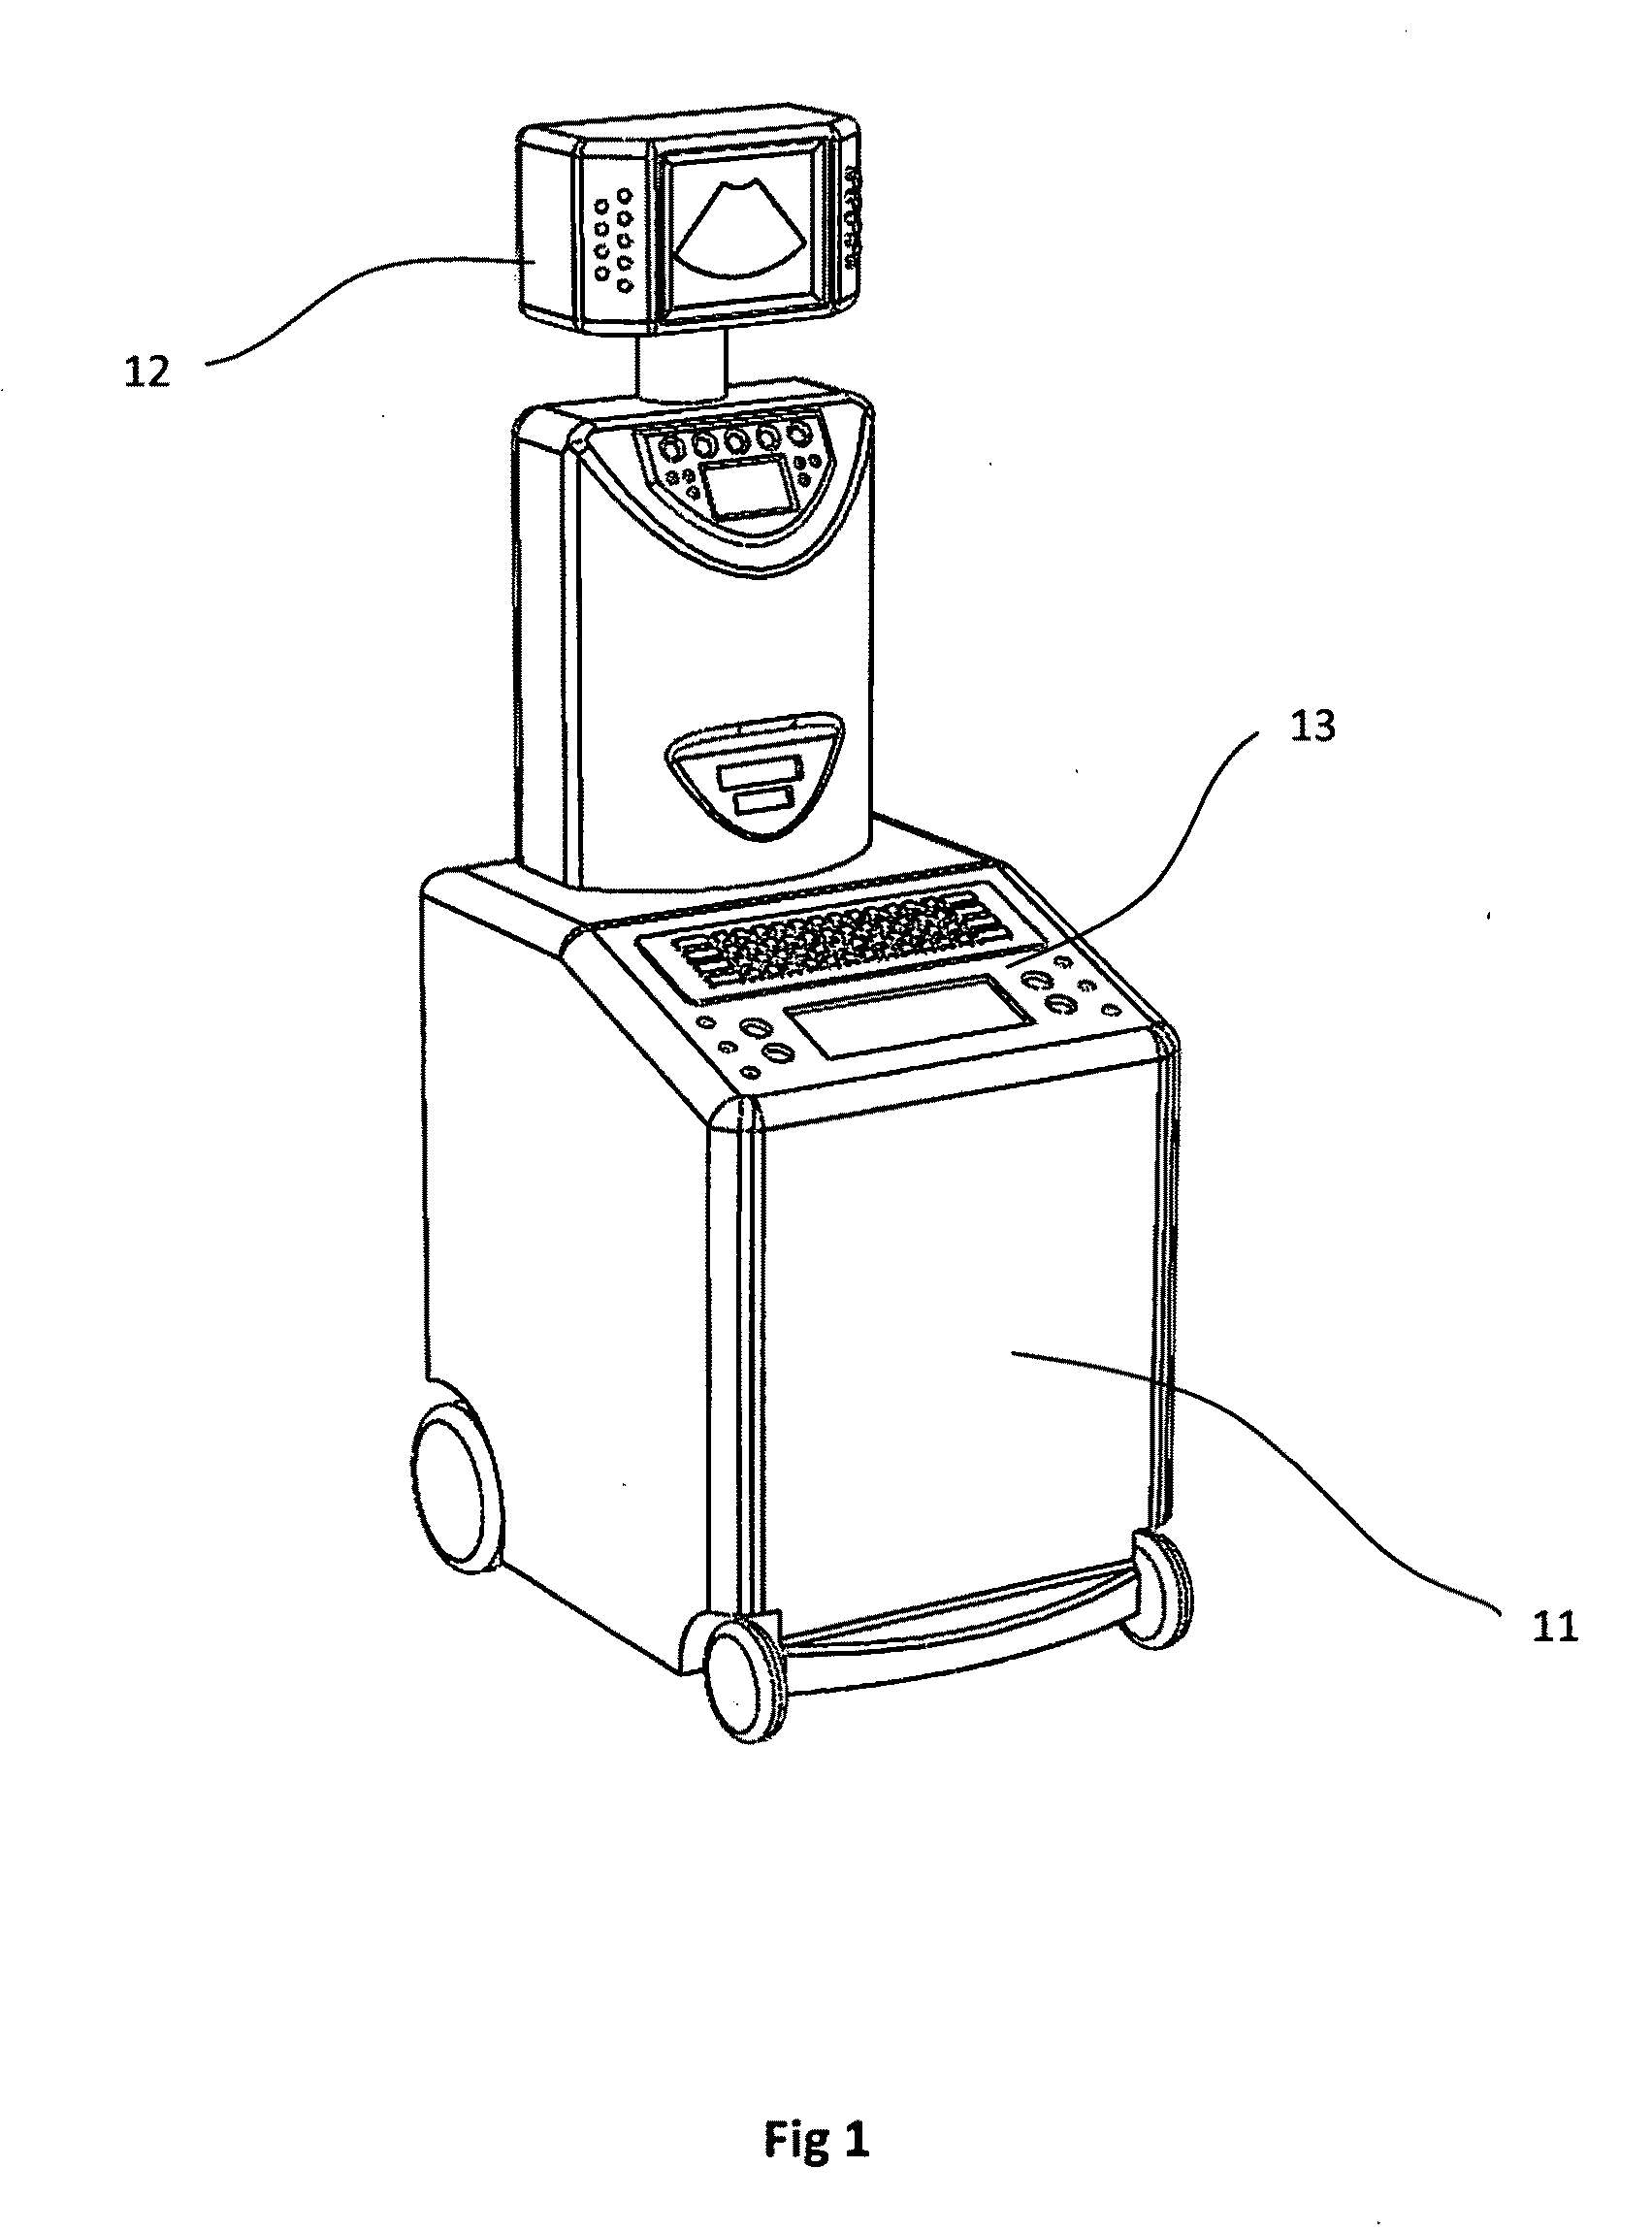 Method and apparatus for diagnosing and treating vascular disease